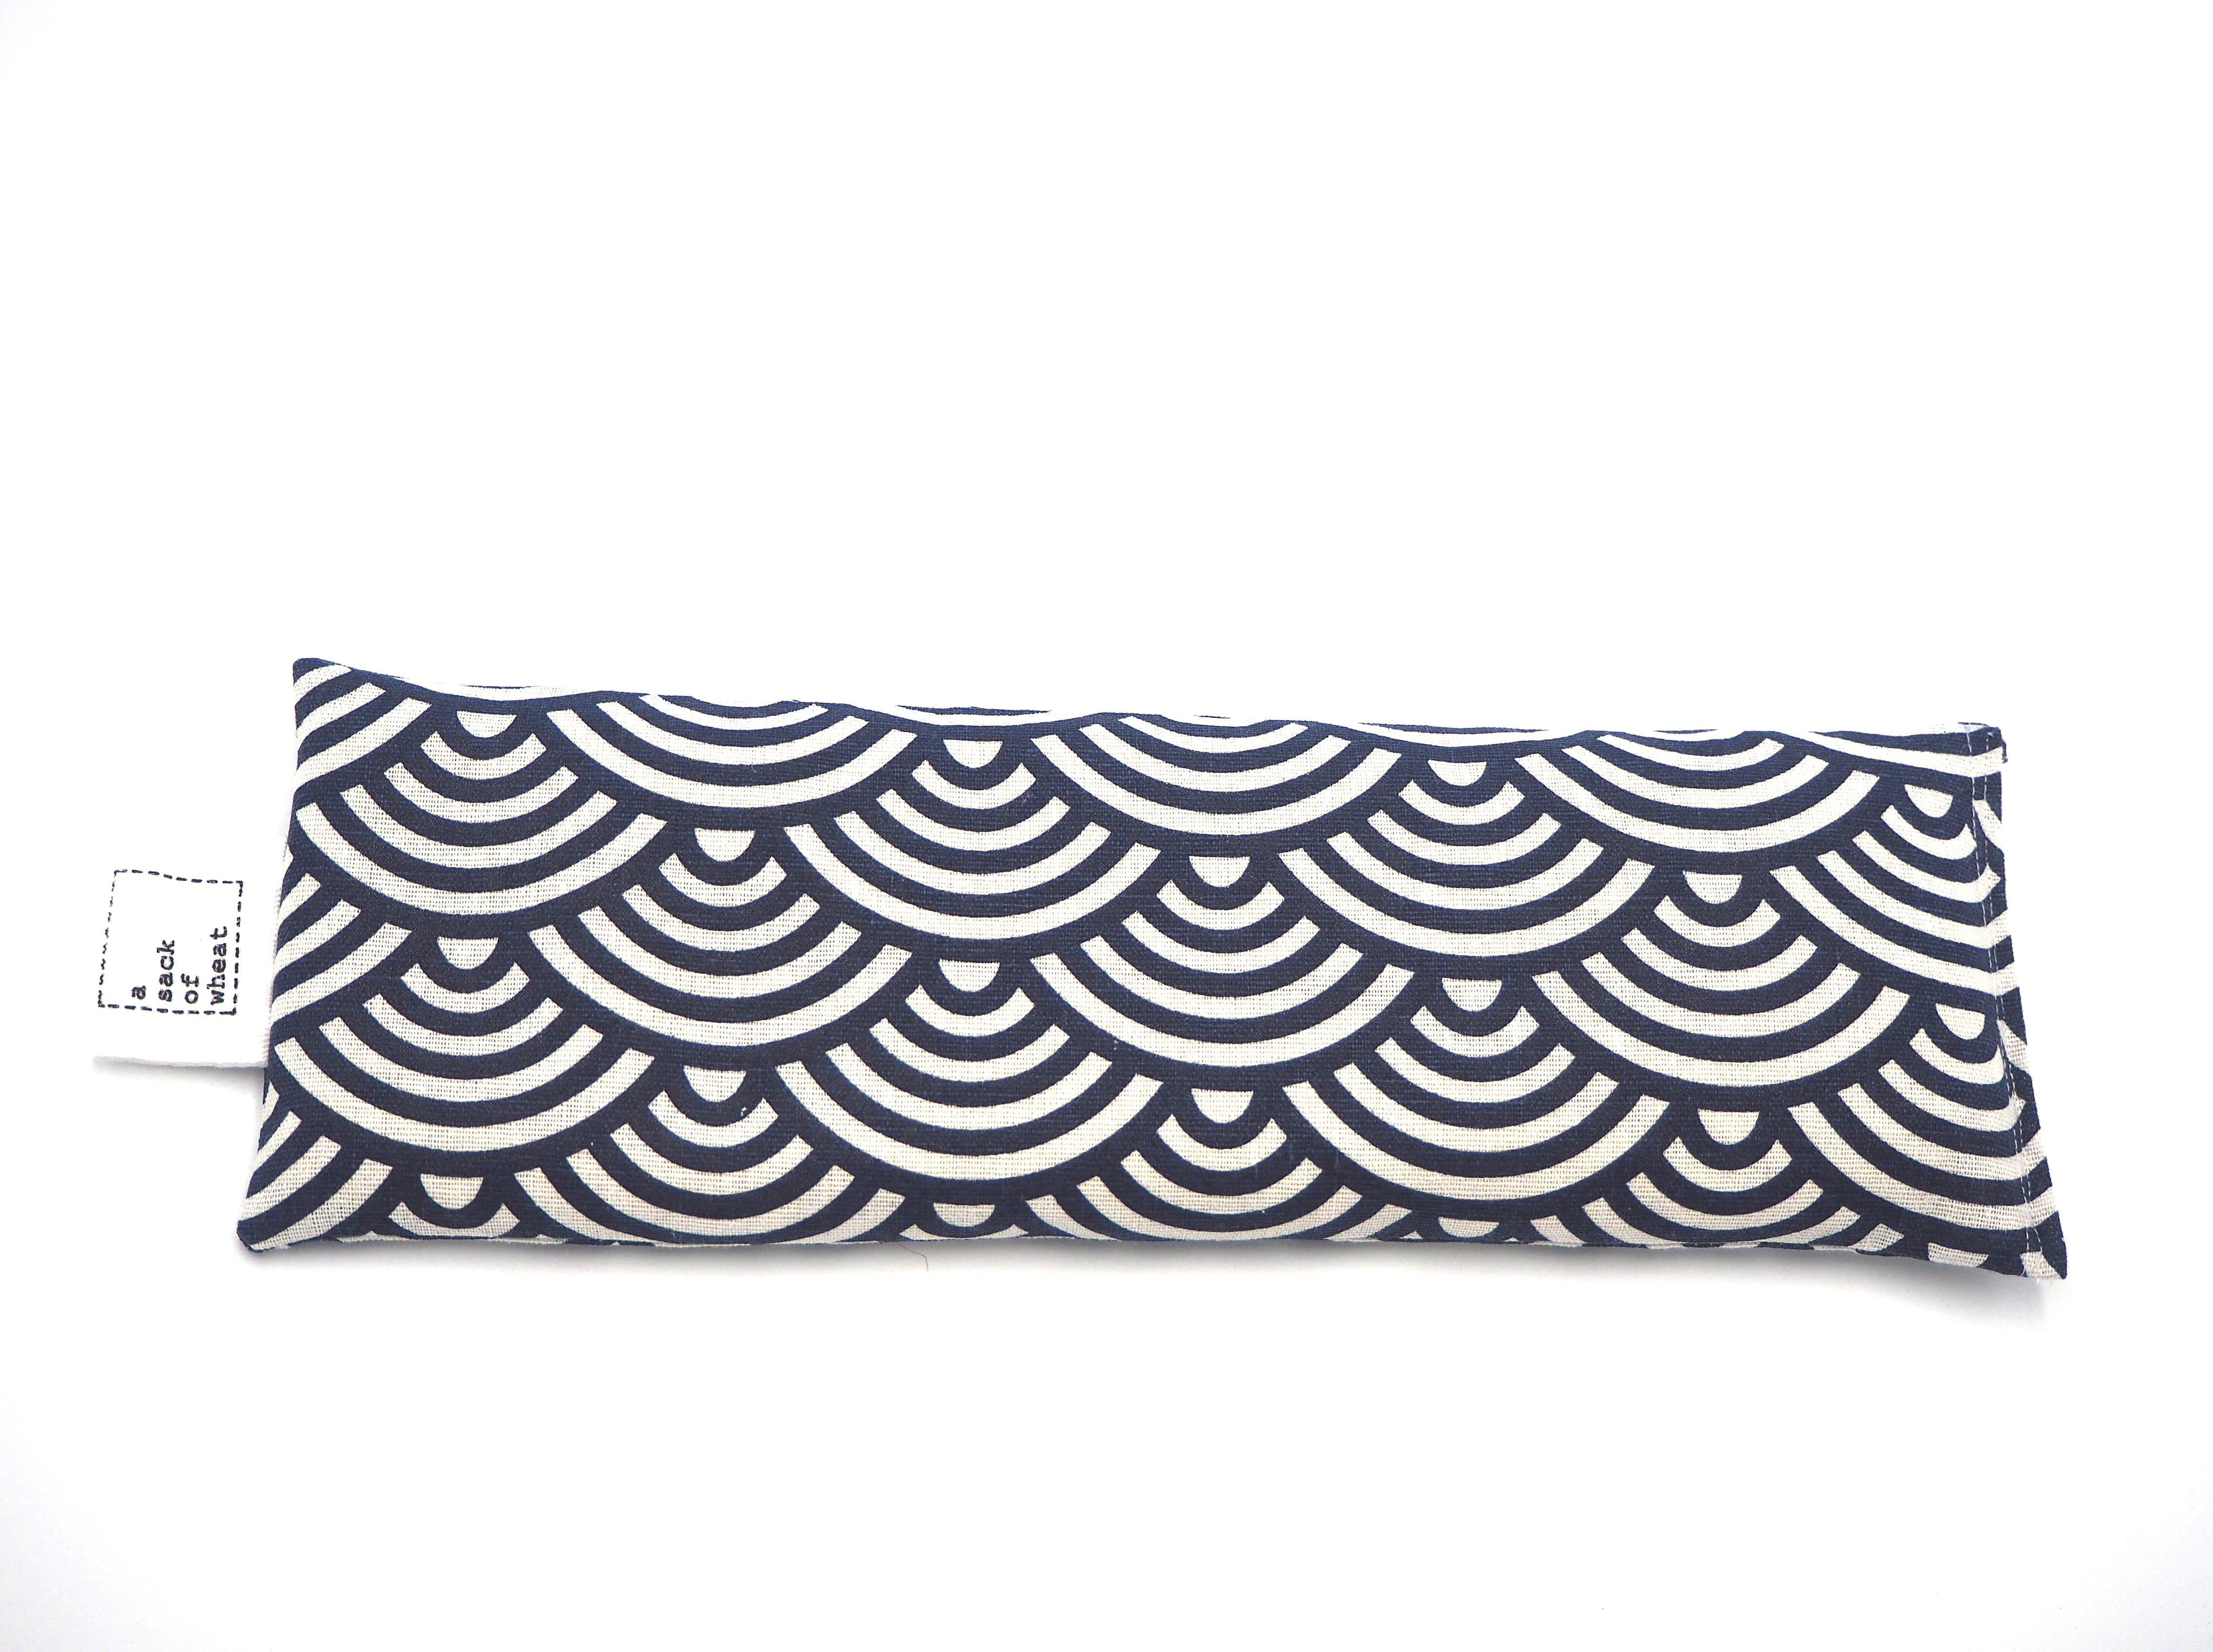 Flat view of A Sack Of Wheat, in a Classic Blue and White shell print, 100% cotton linen fabric